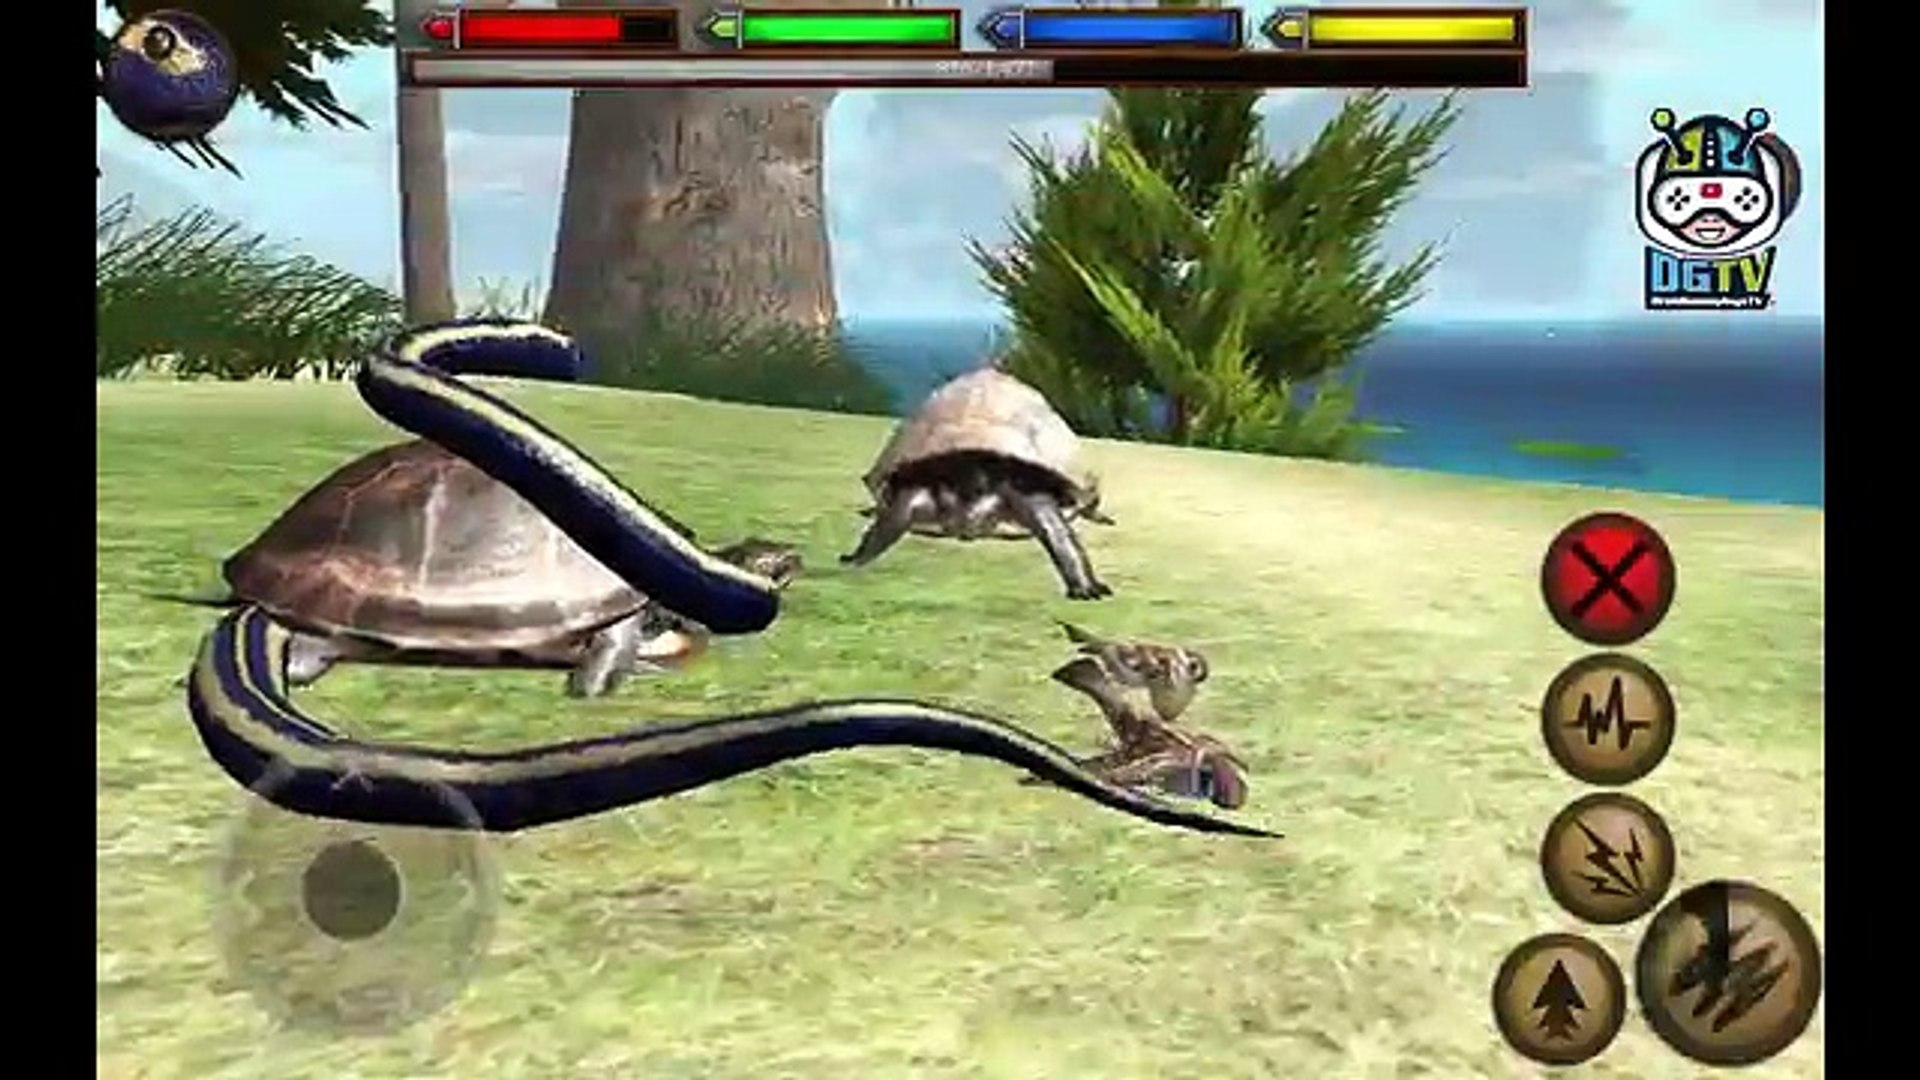 Gluten Free Games - The Snake Simulator is now available on Google Play!